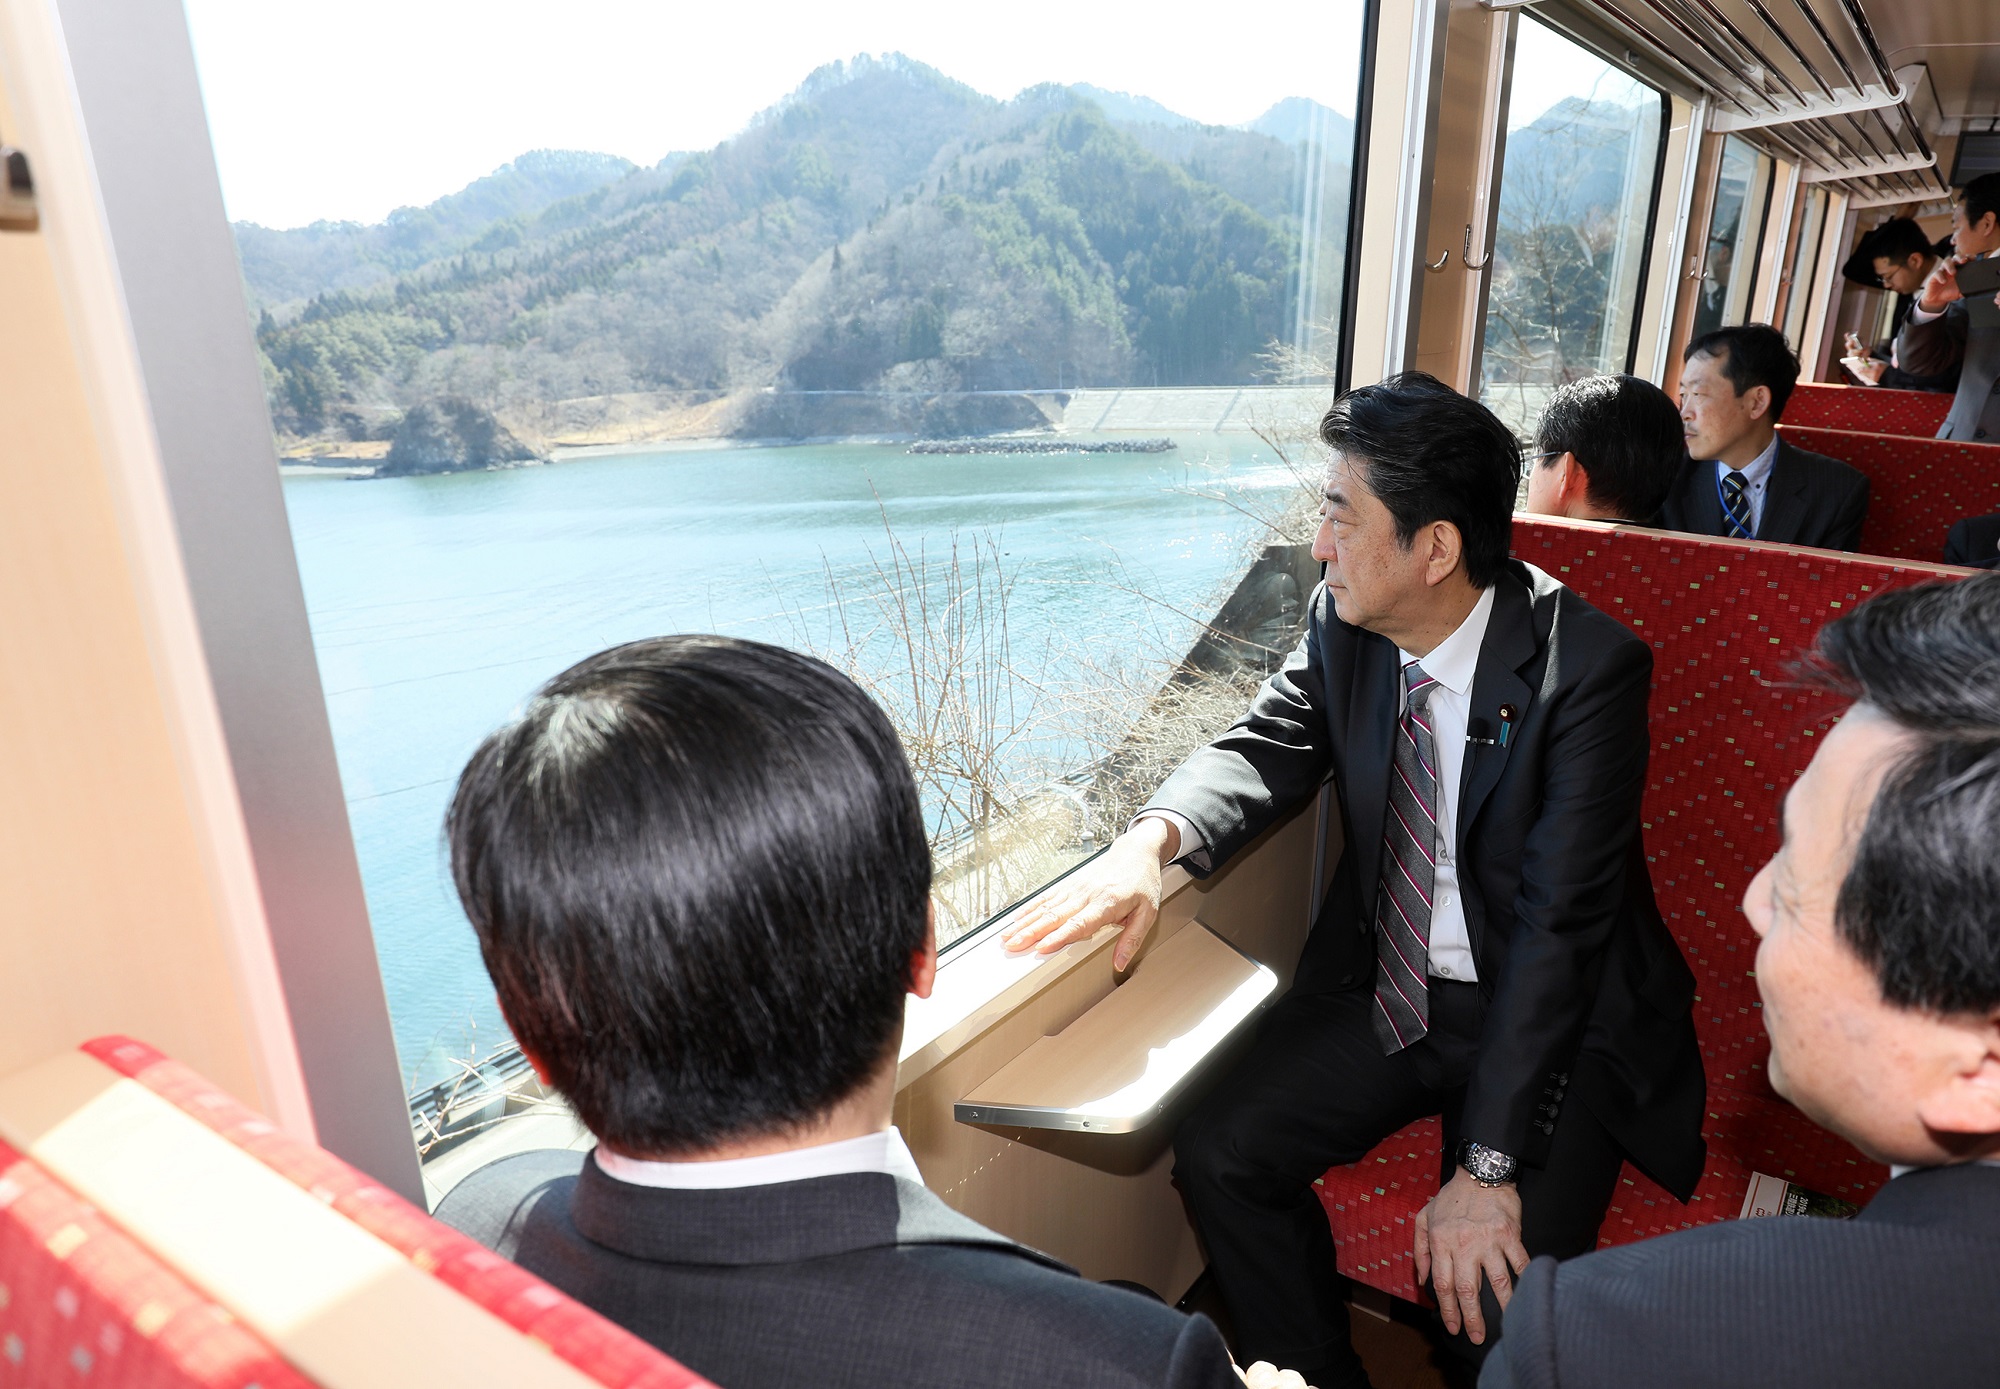 Photograph of the Prime Minister observing the train car trial run